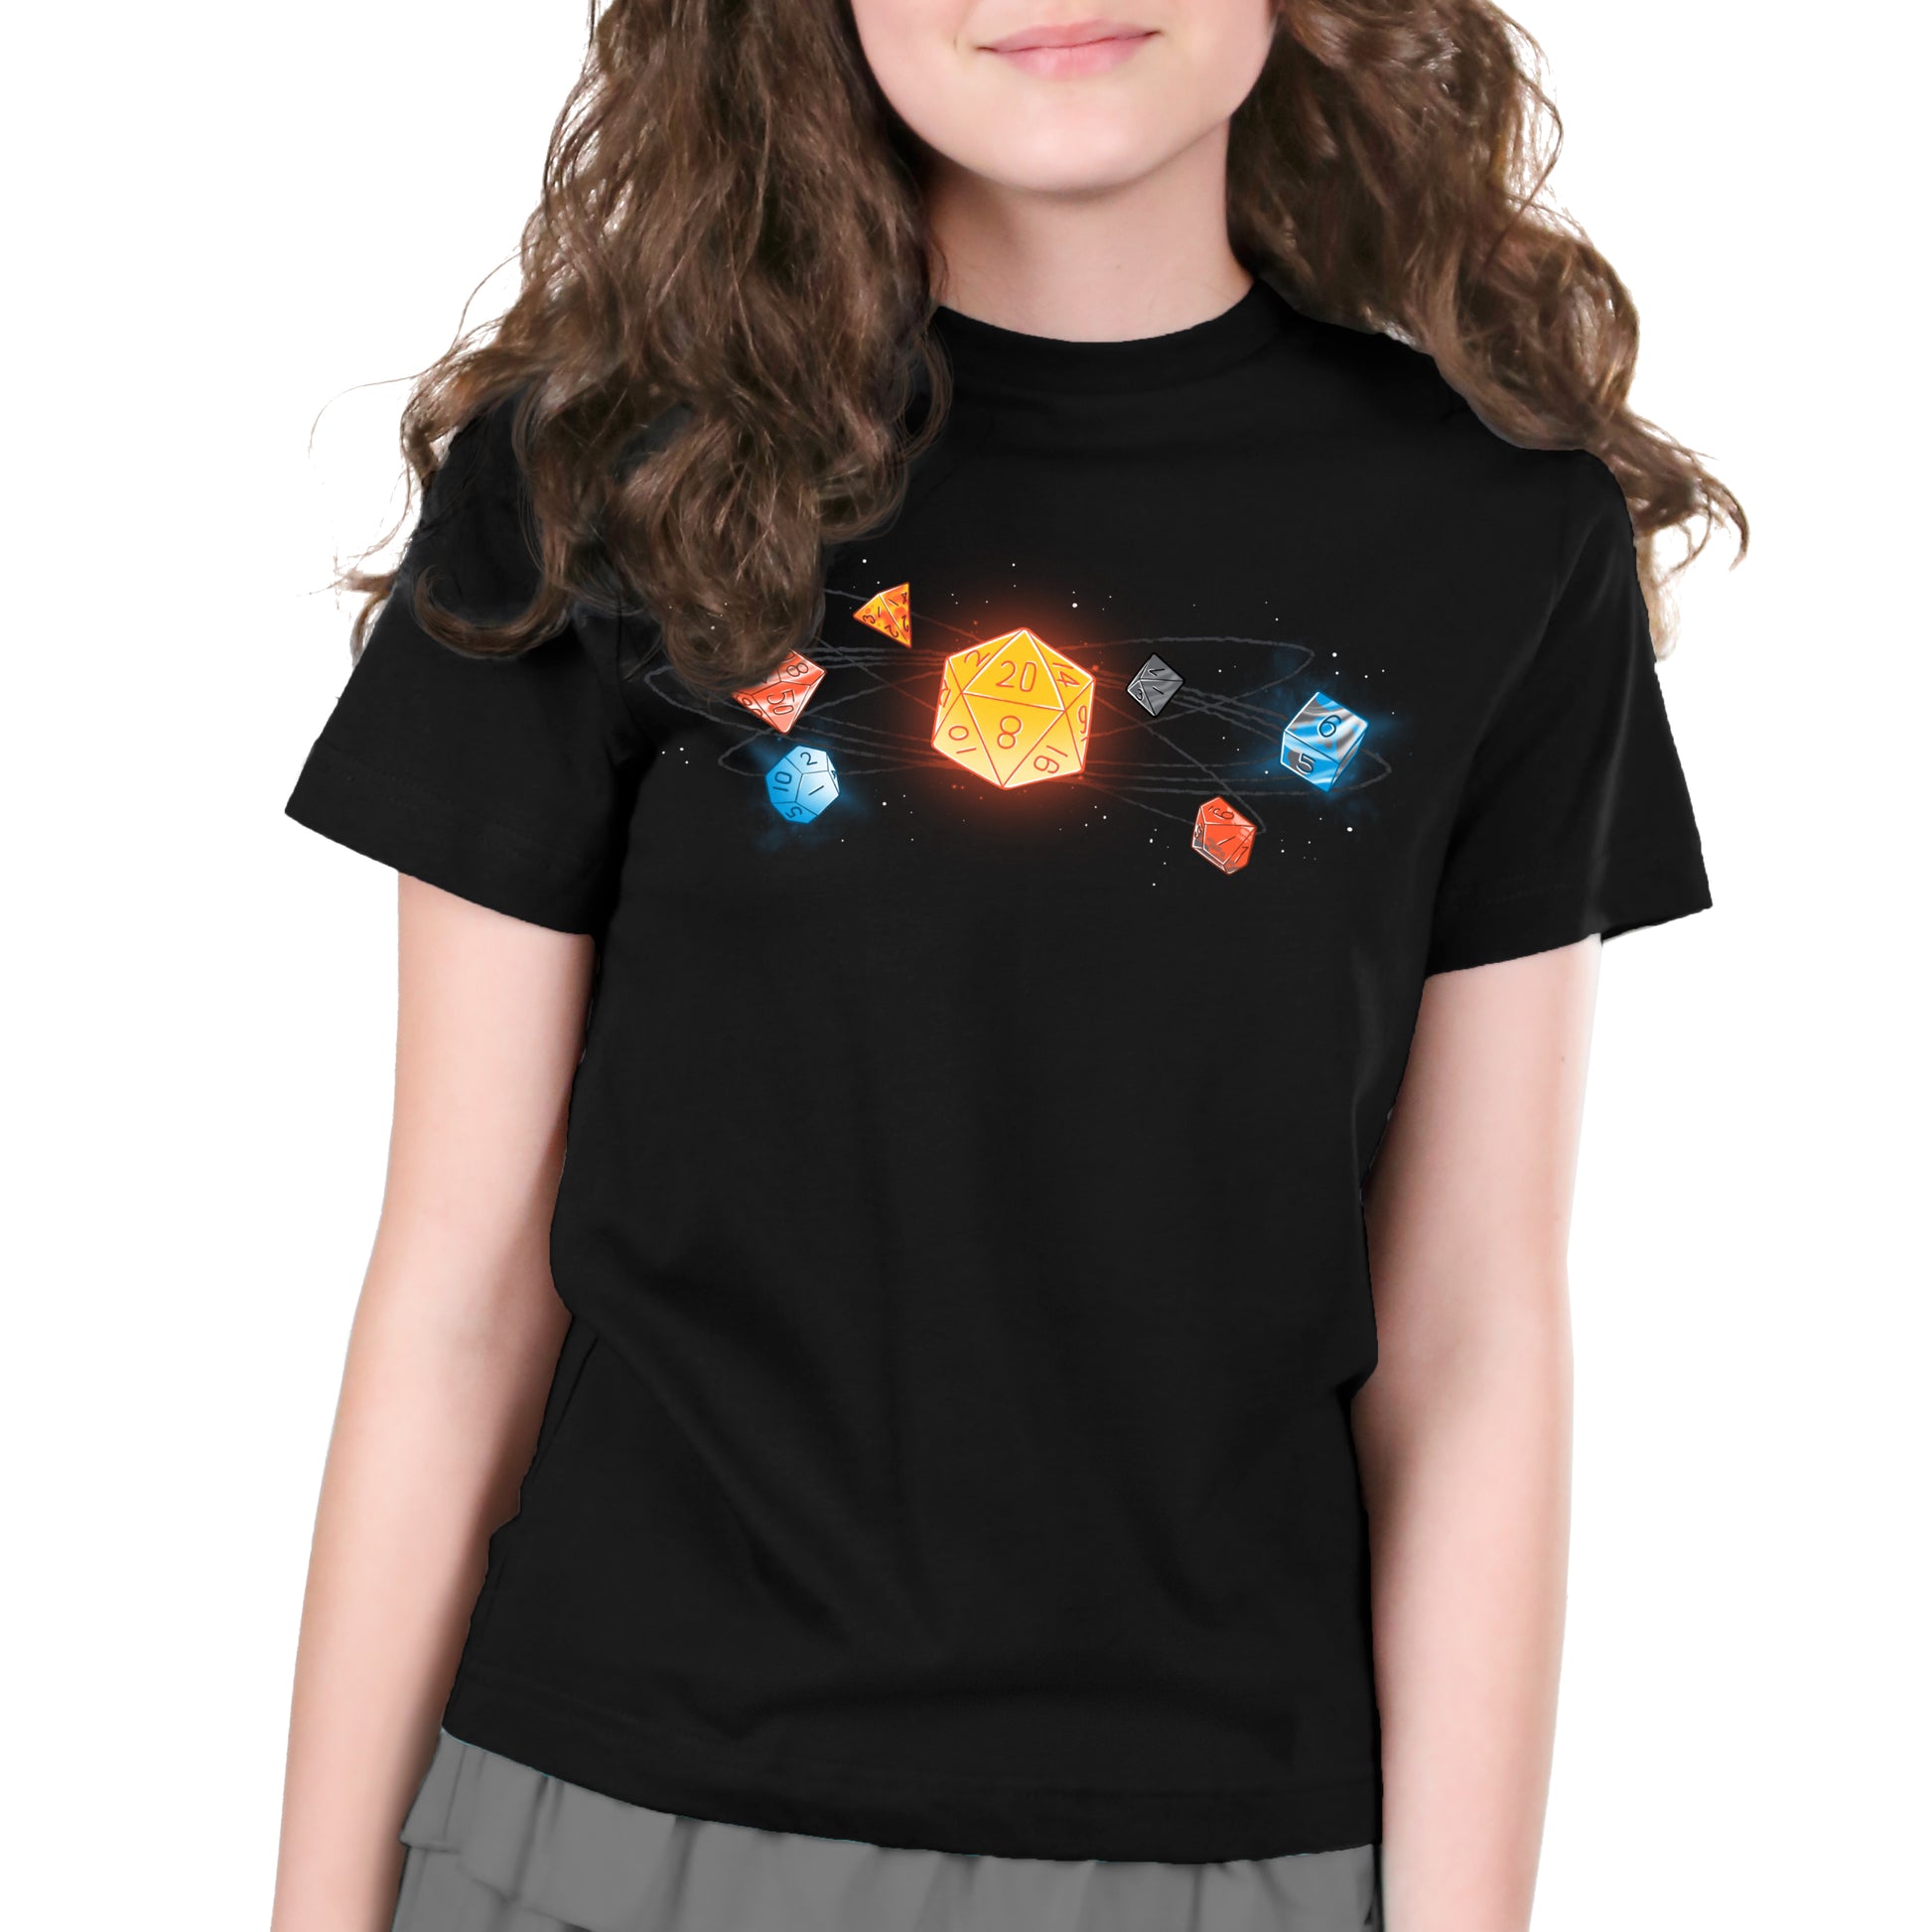 A young girl wearing a black T-shirt with an image of D20 dice from TeeTurtle.